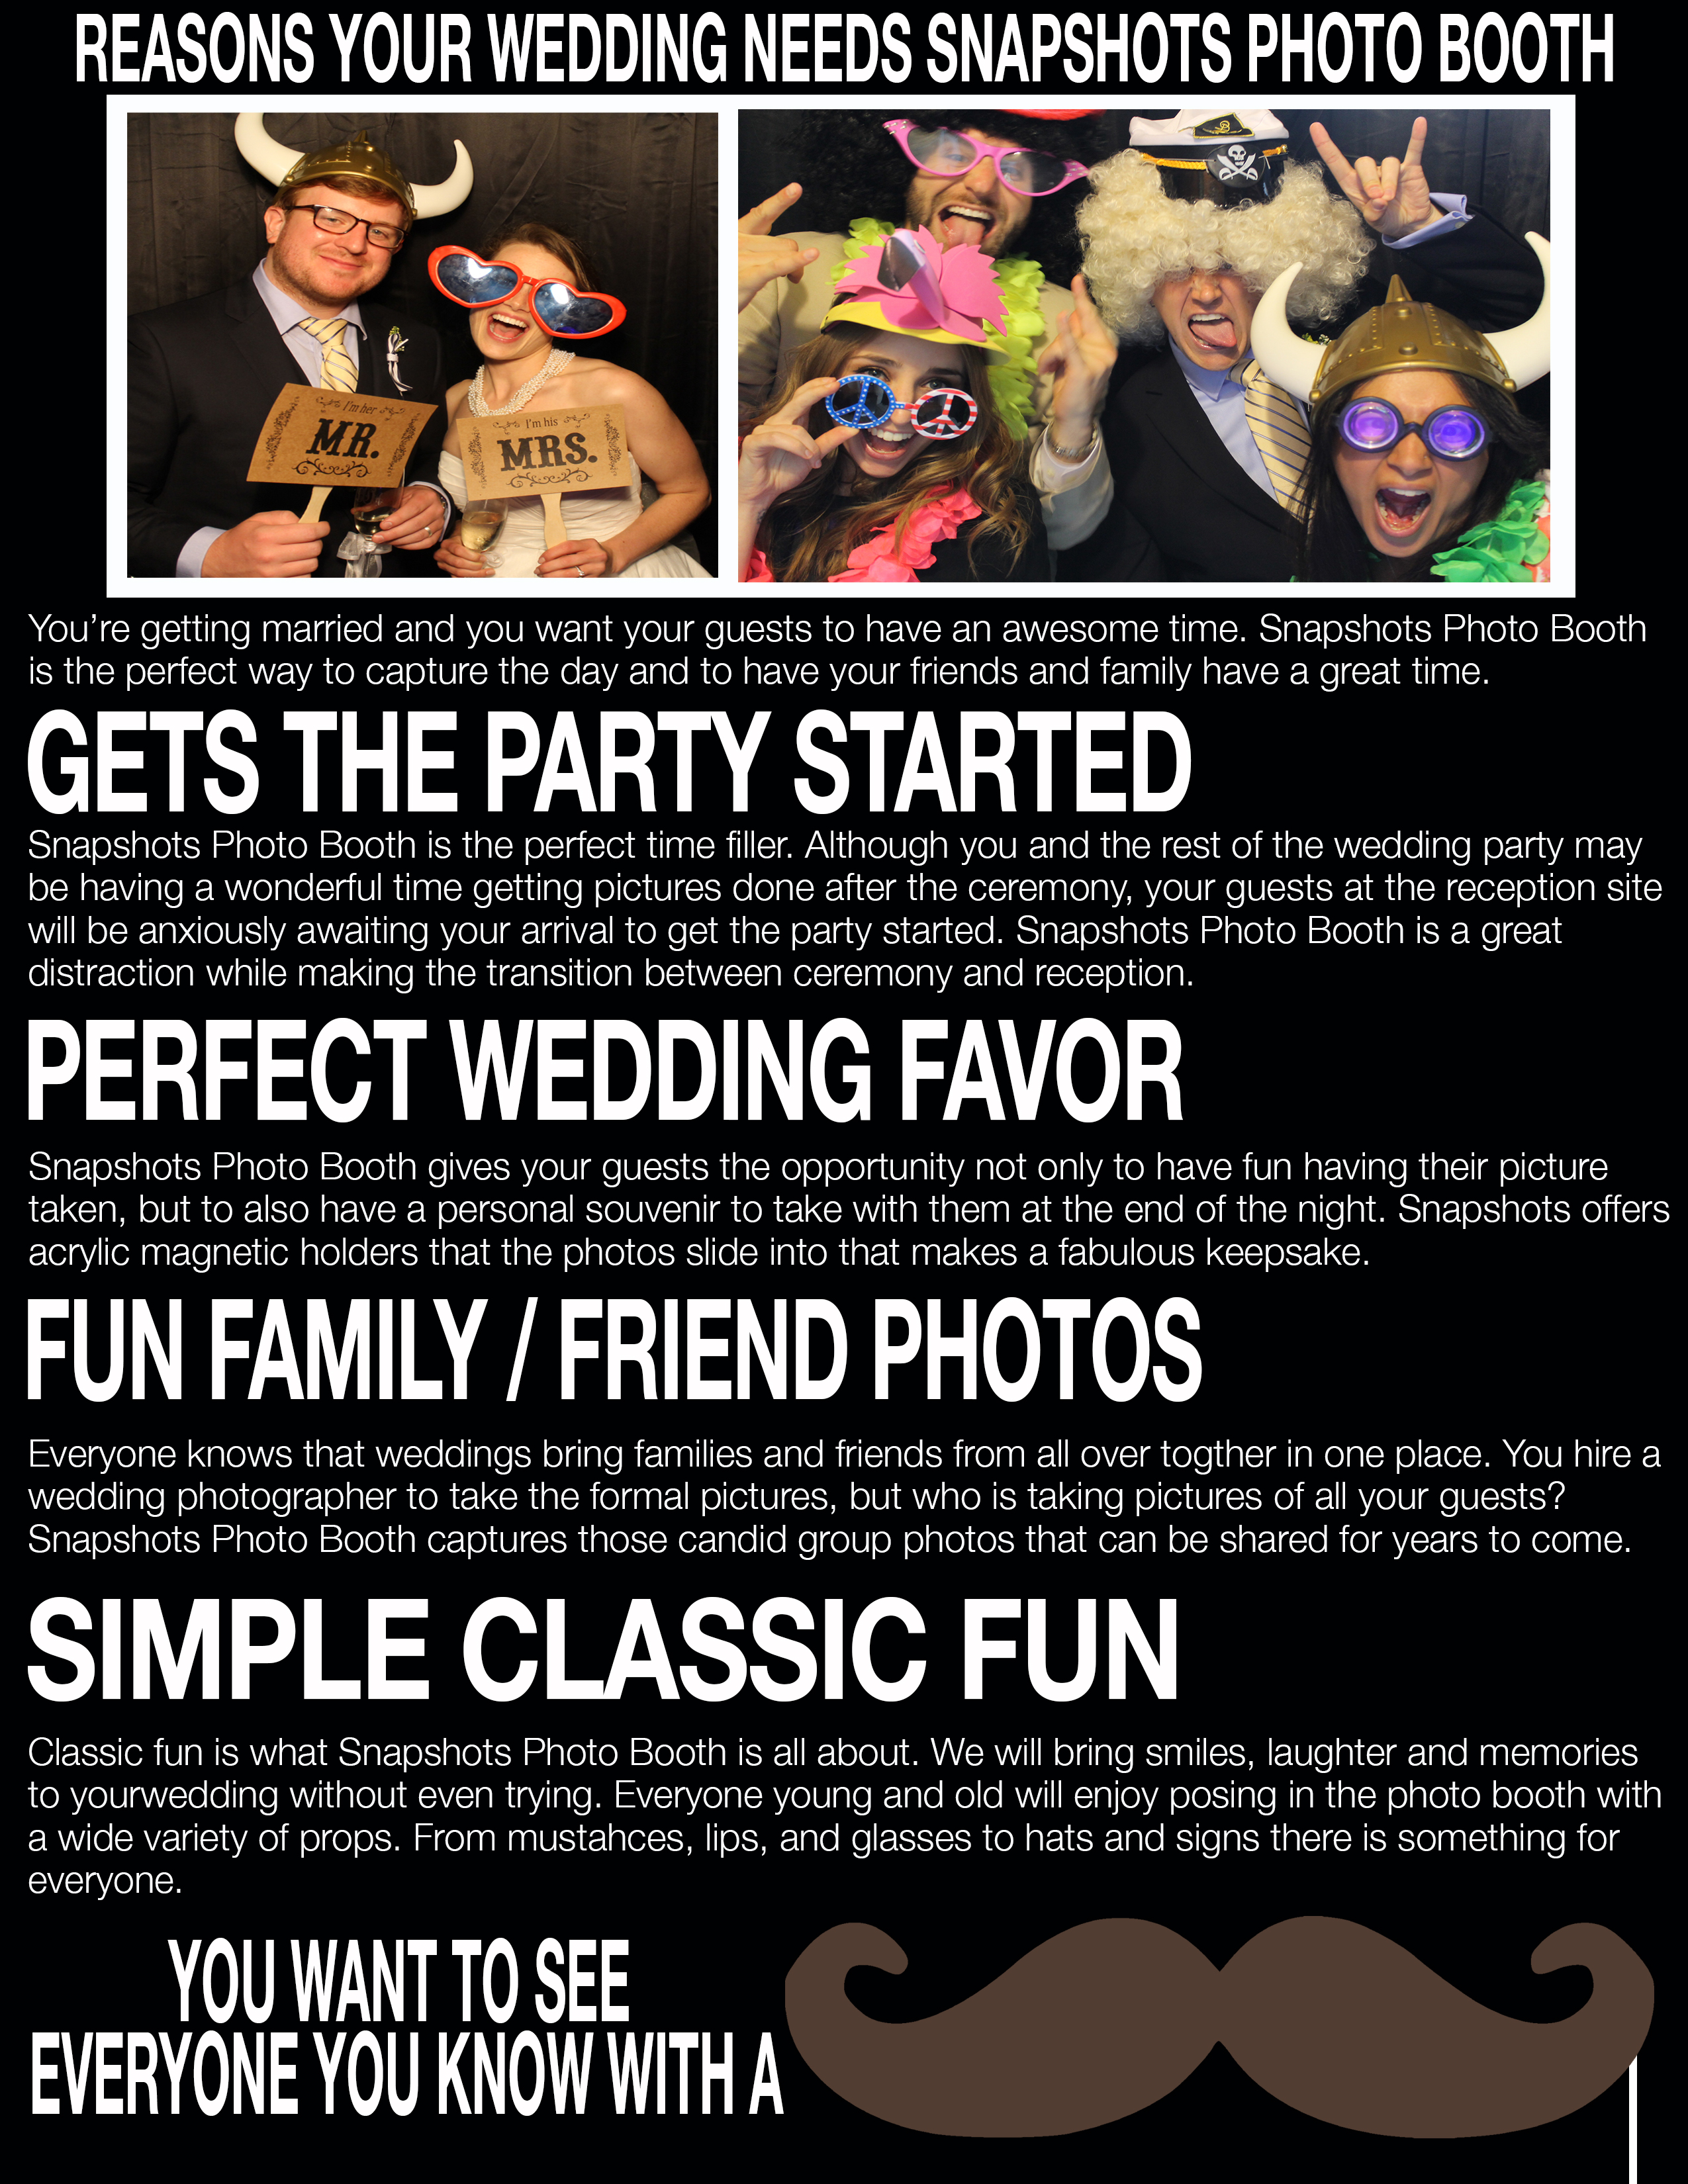 5 Reasons Your Wedding Needs a Photo Booth